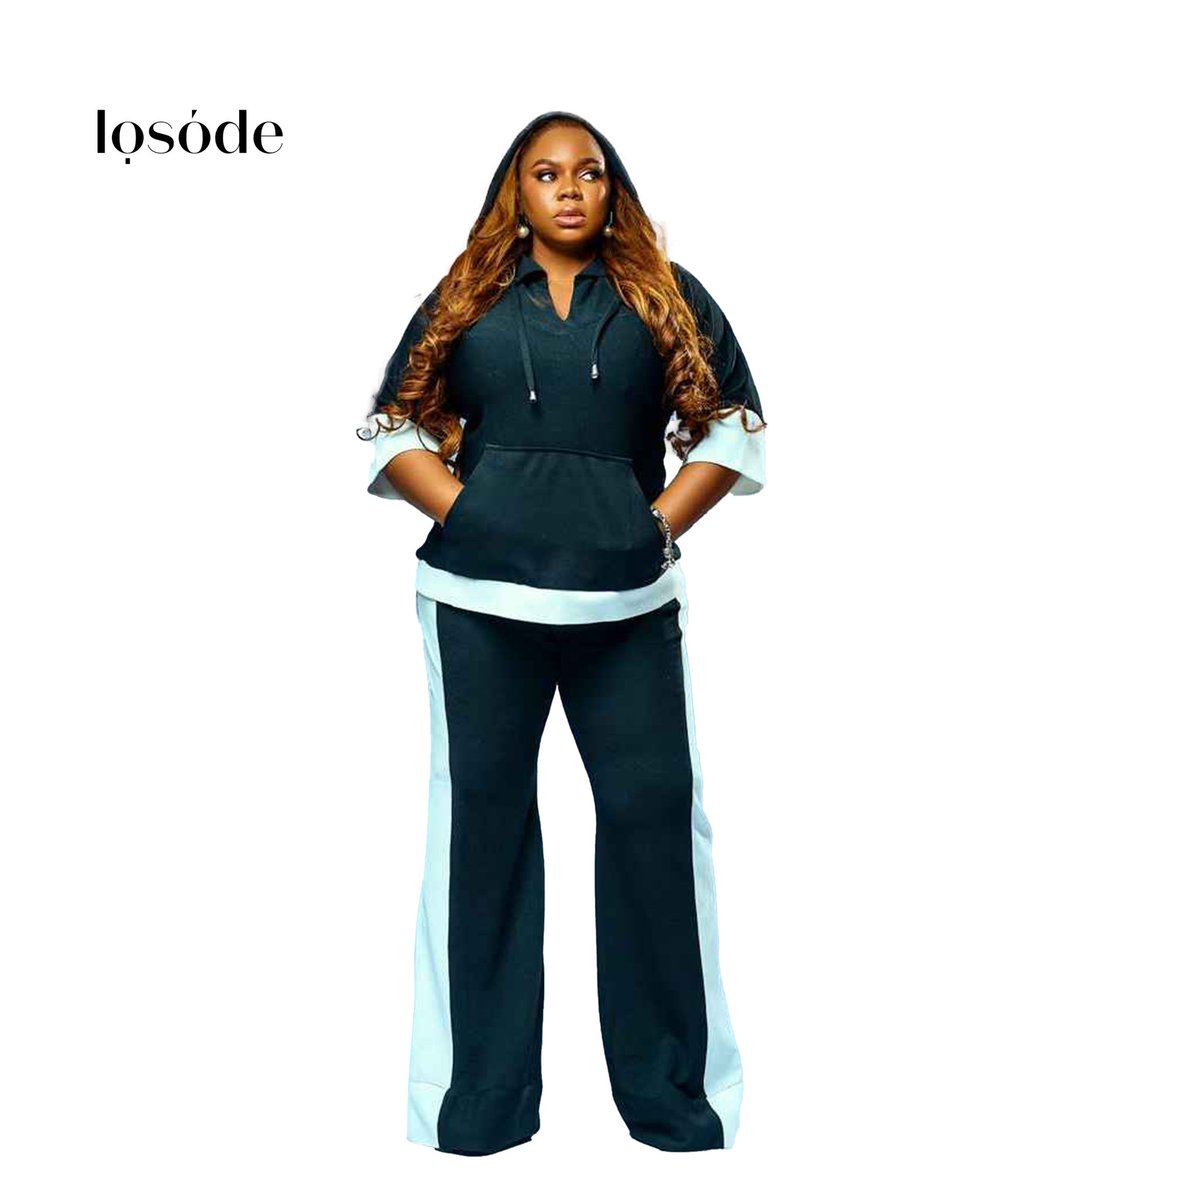 Let your outfit do the talking…. Shop now at losode.com

#blackownedbusiness #losode #fashion #Africanfashion #fashiondesigner #fashionstyle #fashionbusiness #fashionAfrica #losodemarketplace #africanfashion